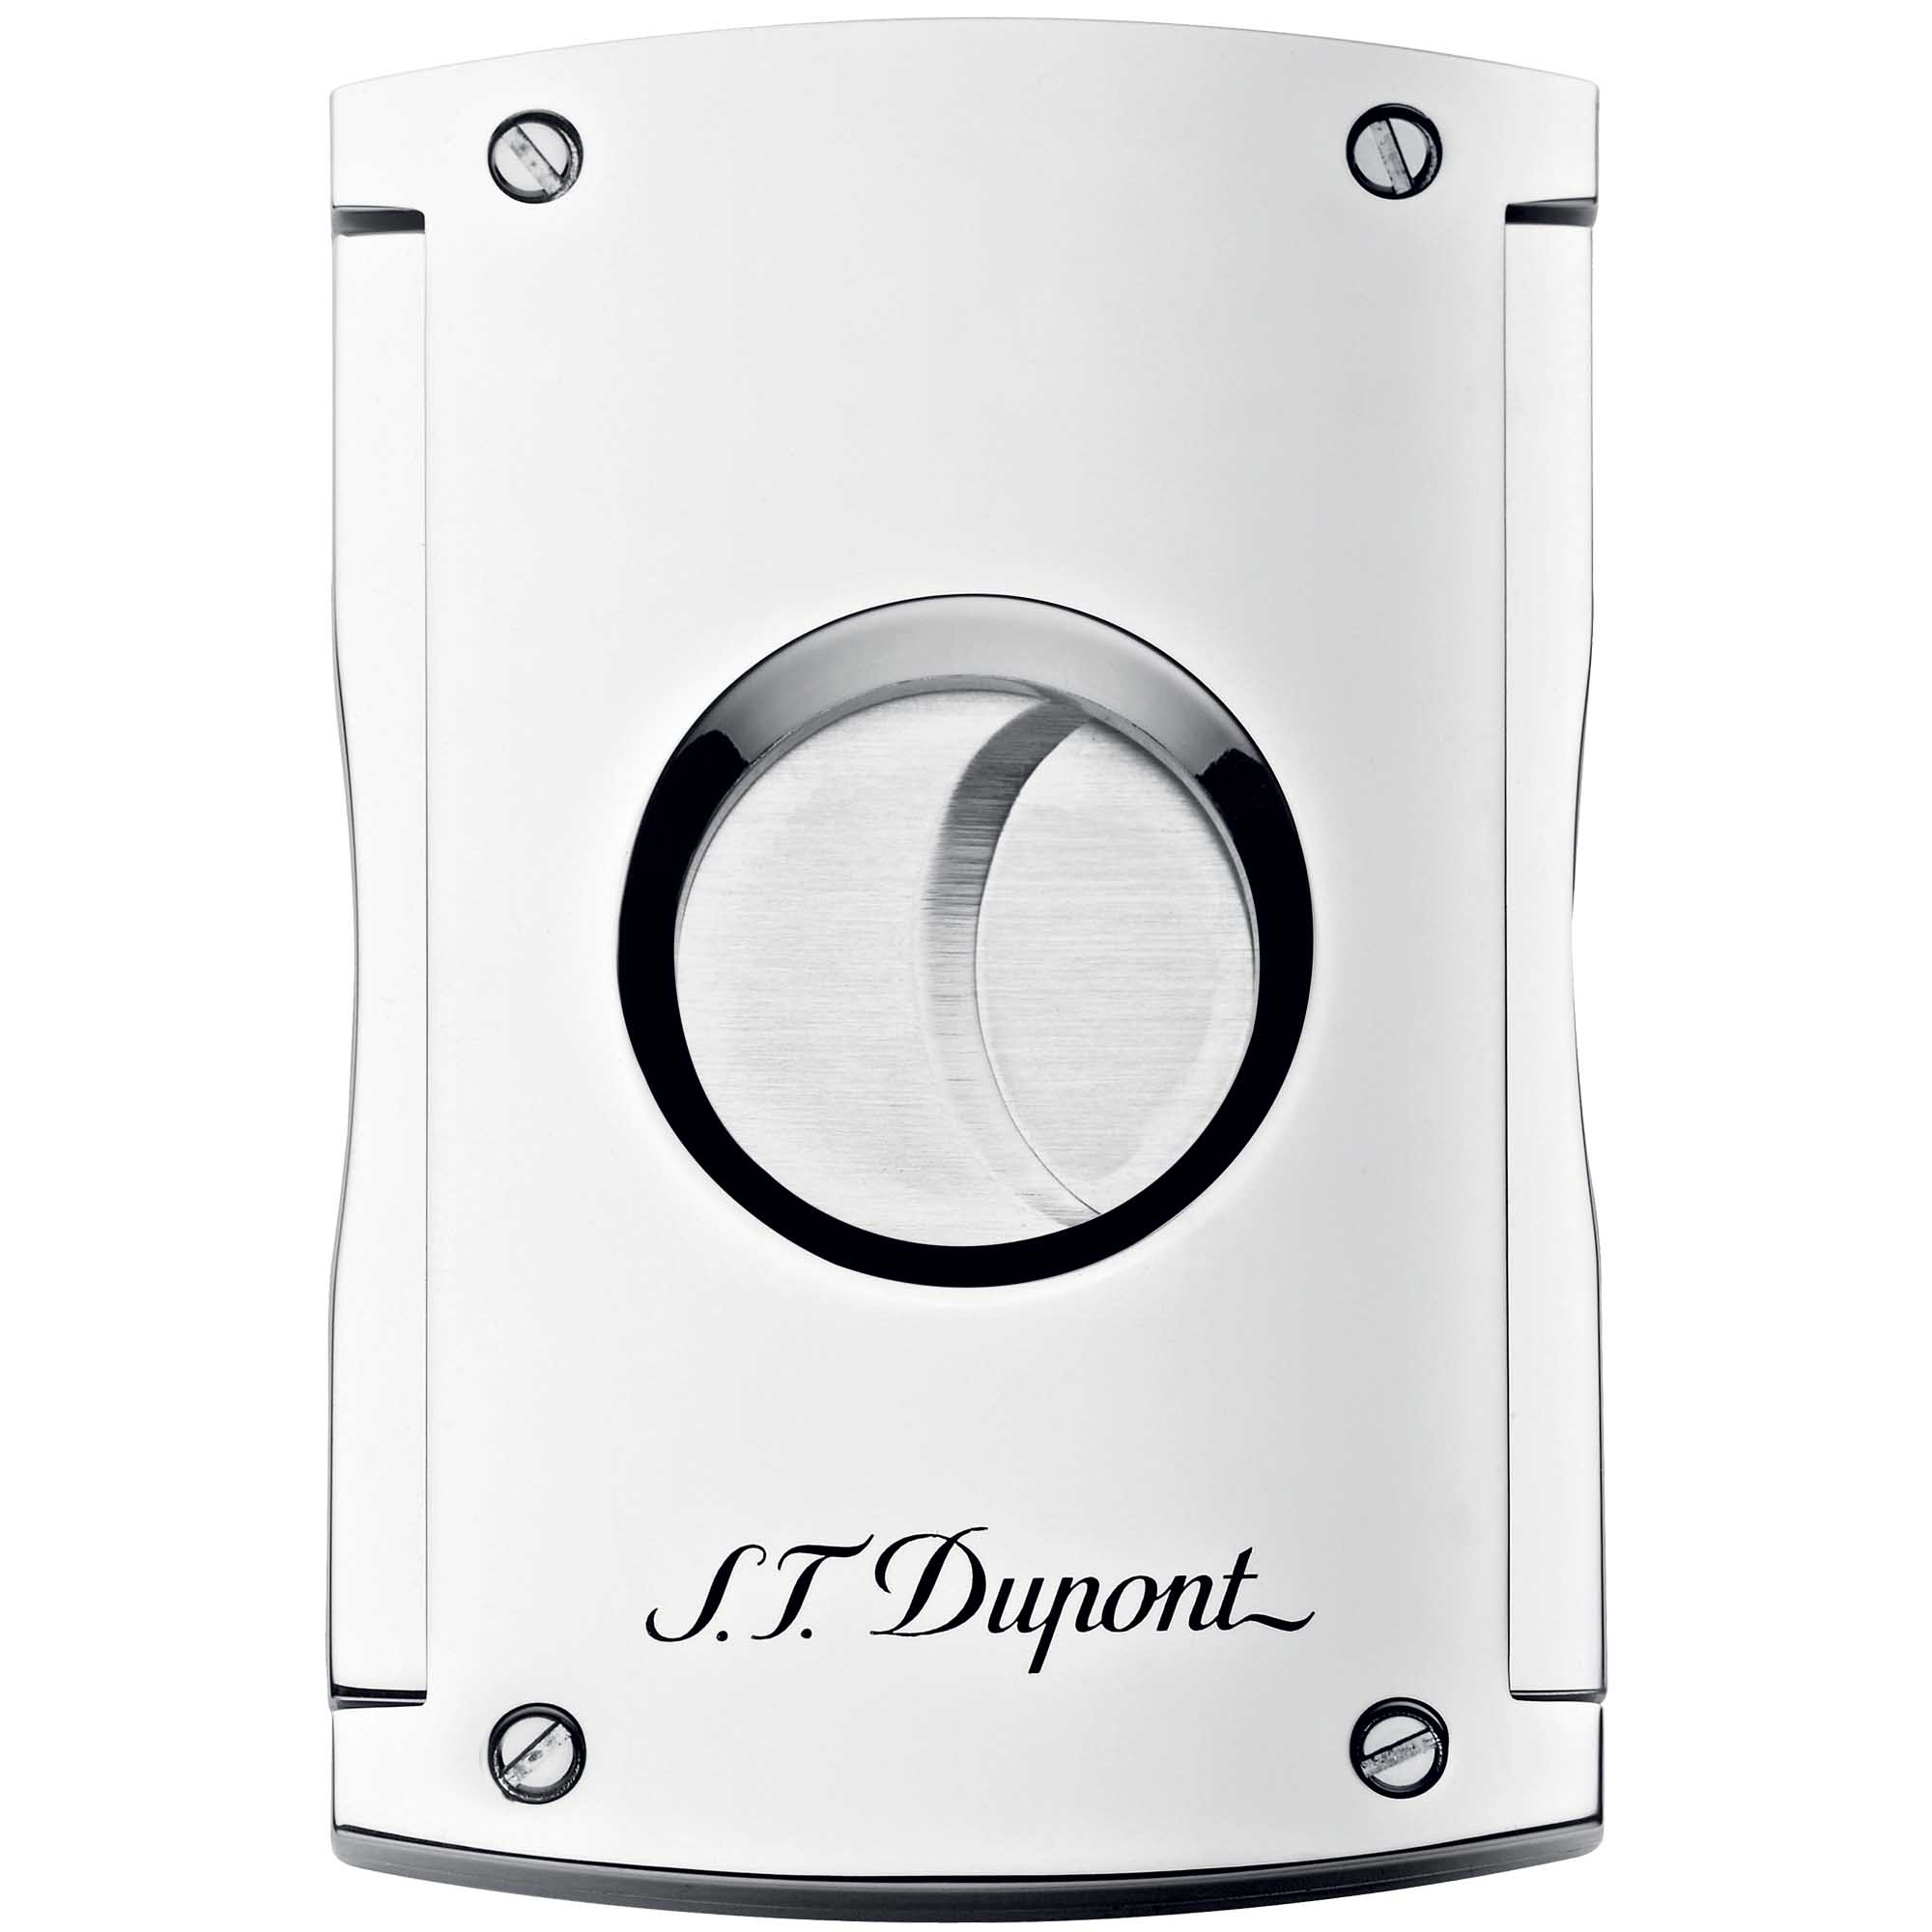 S.T. Dupont Cutter Chrome